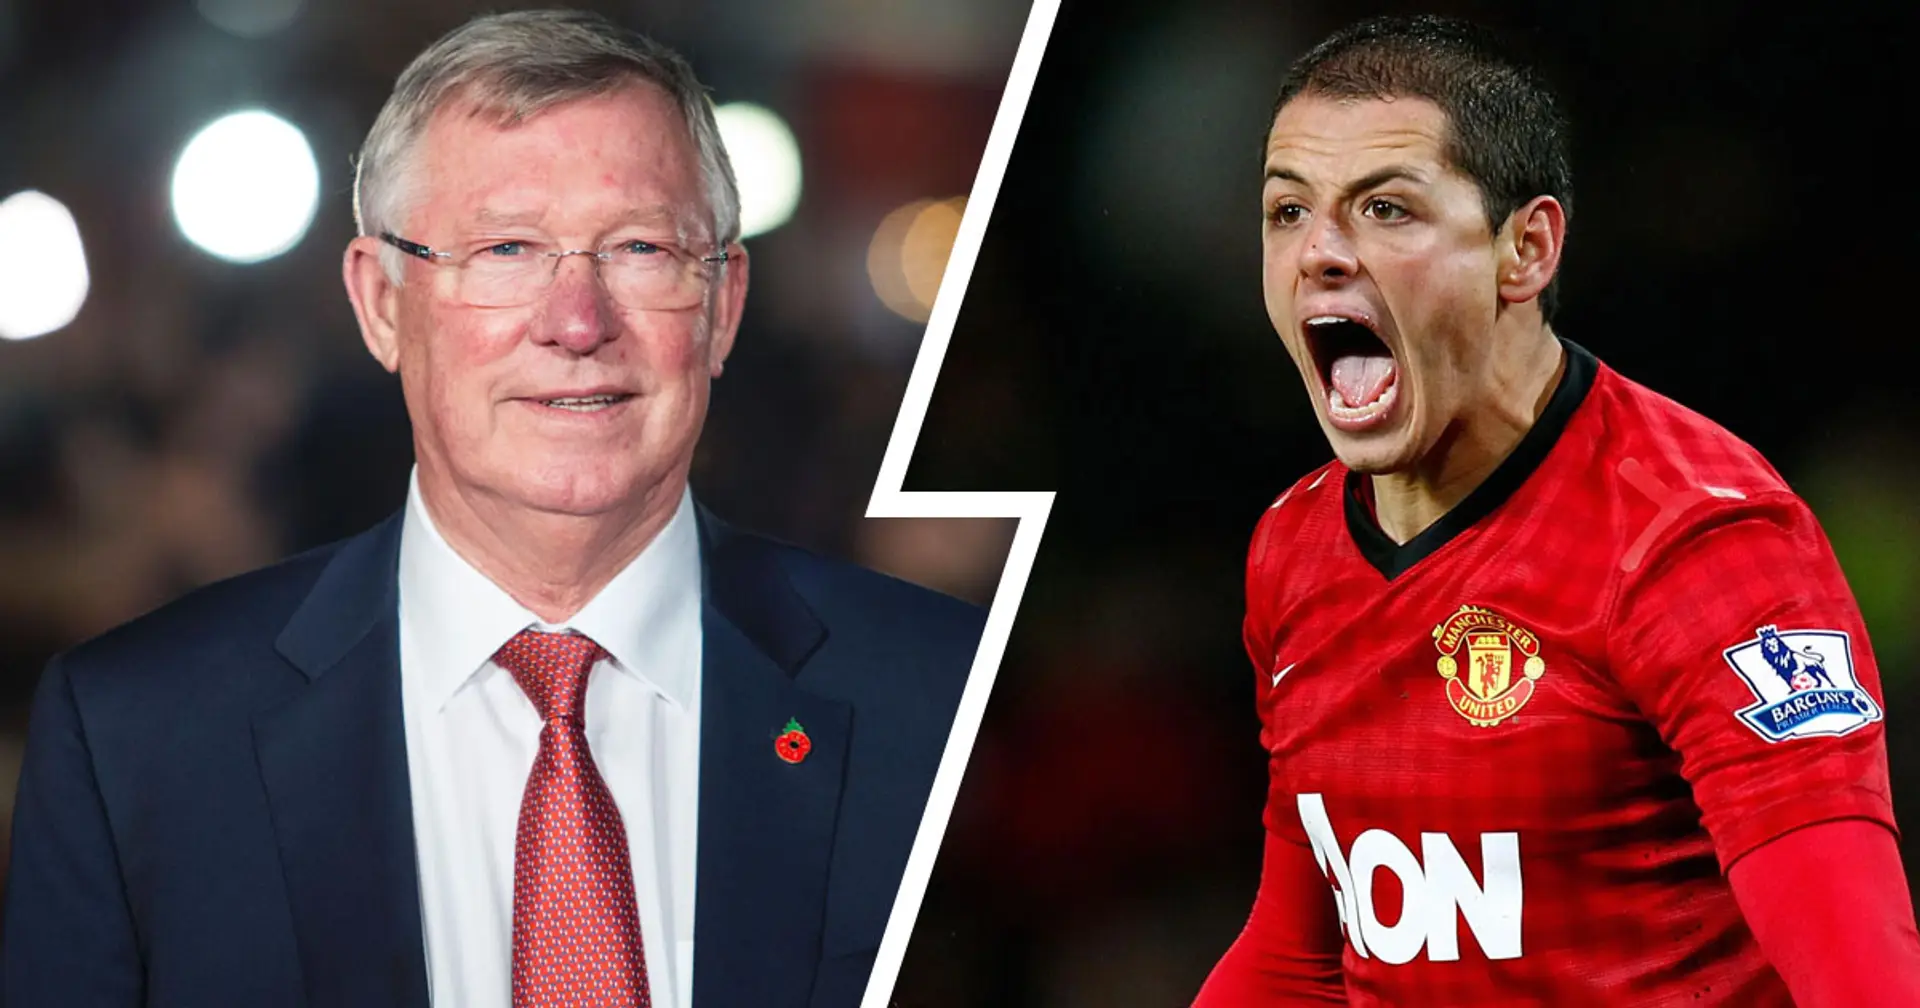 ‘He knew that what’s important was Manchester United’: Javier Hernandez identifies thing that separated Sir Alex from any other manager